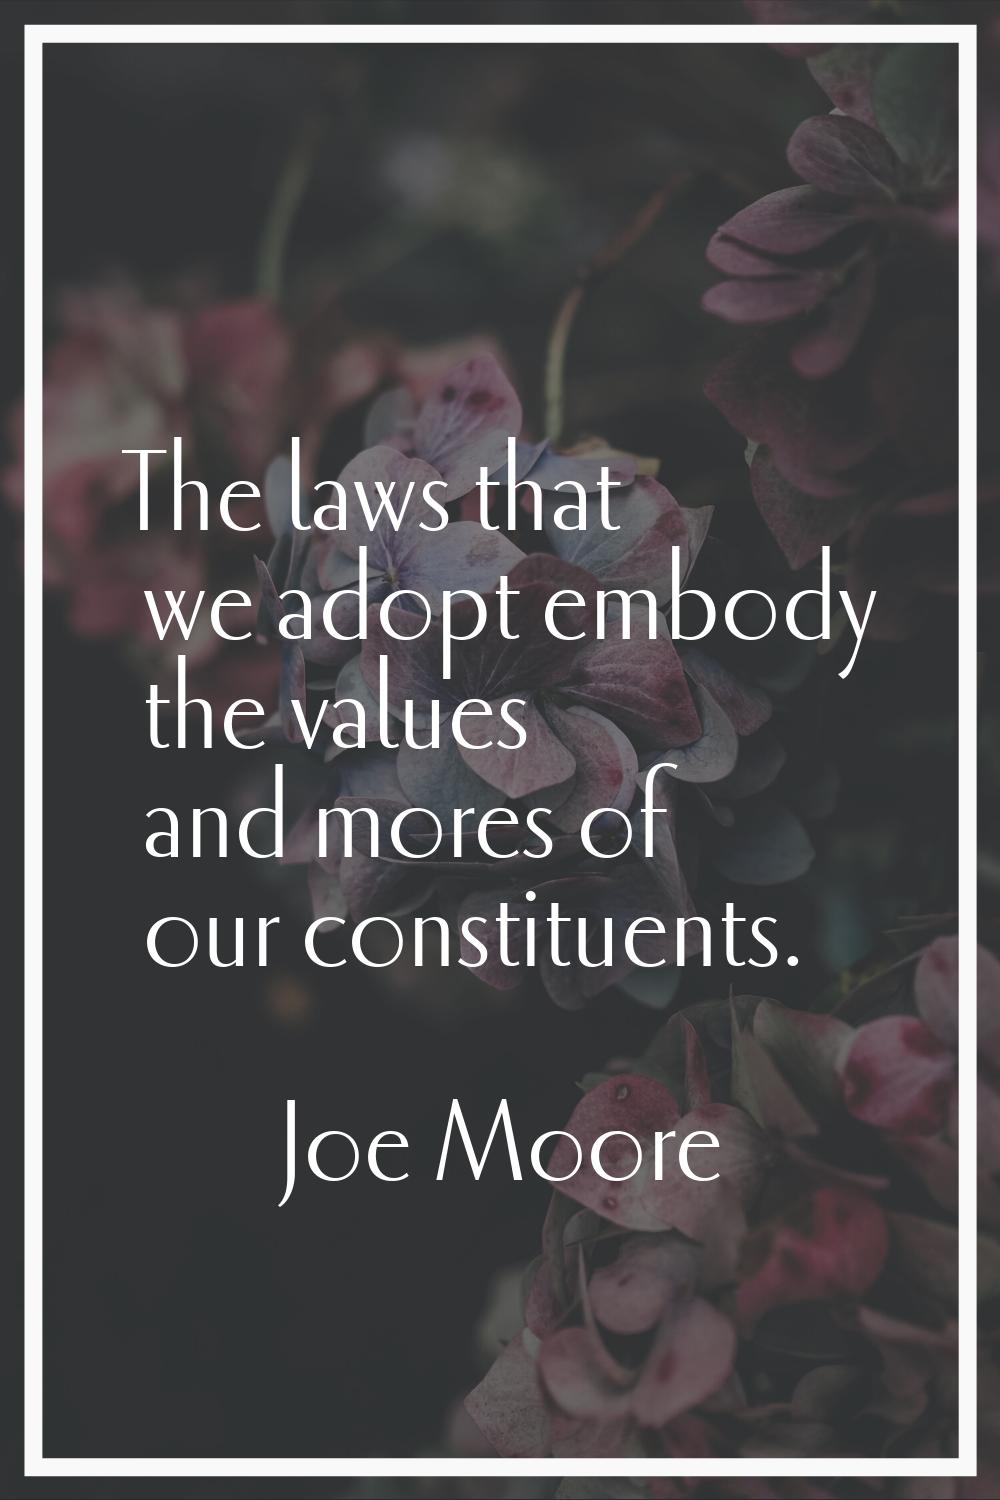 The laws that we adopt embody the values and mores of our constituents.